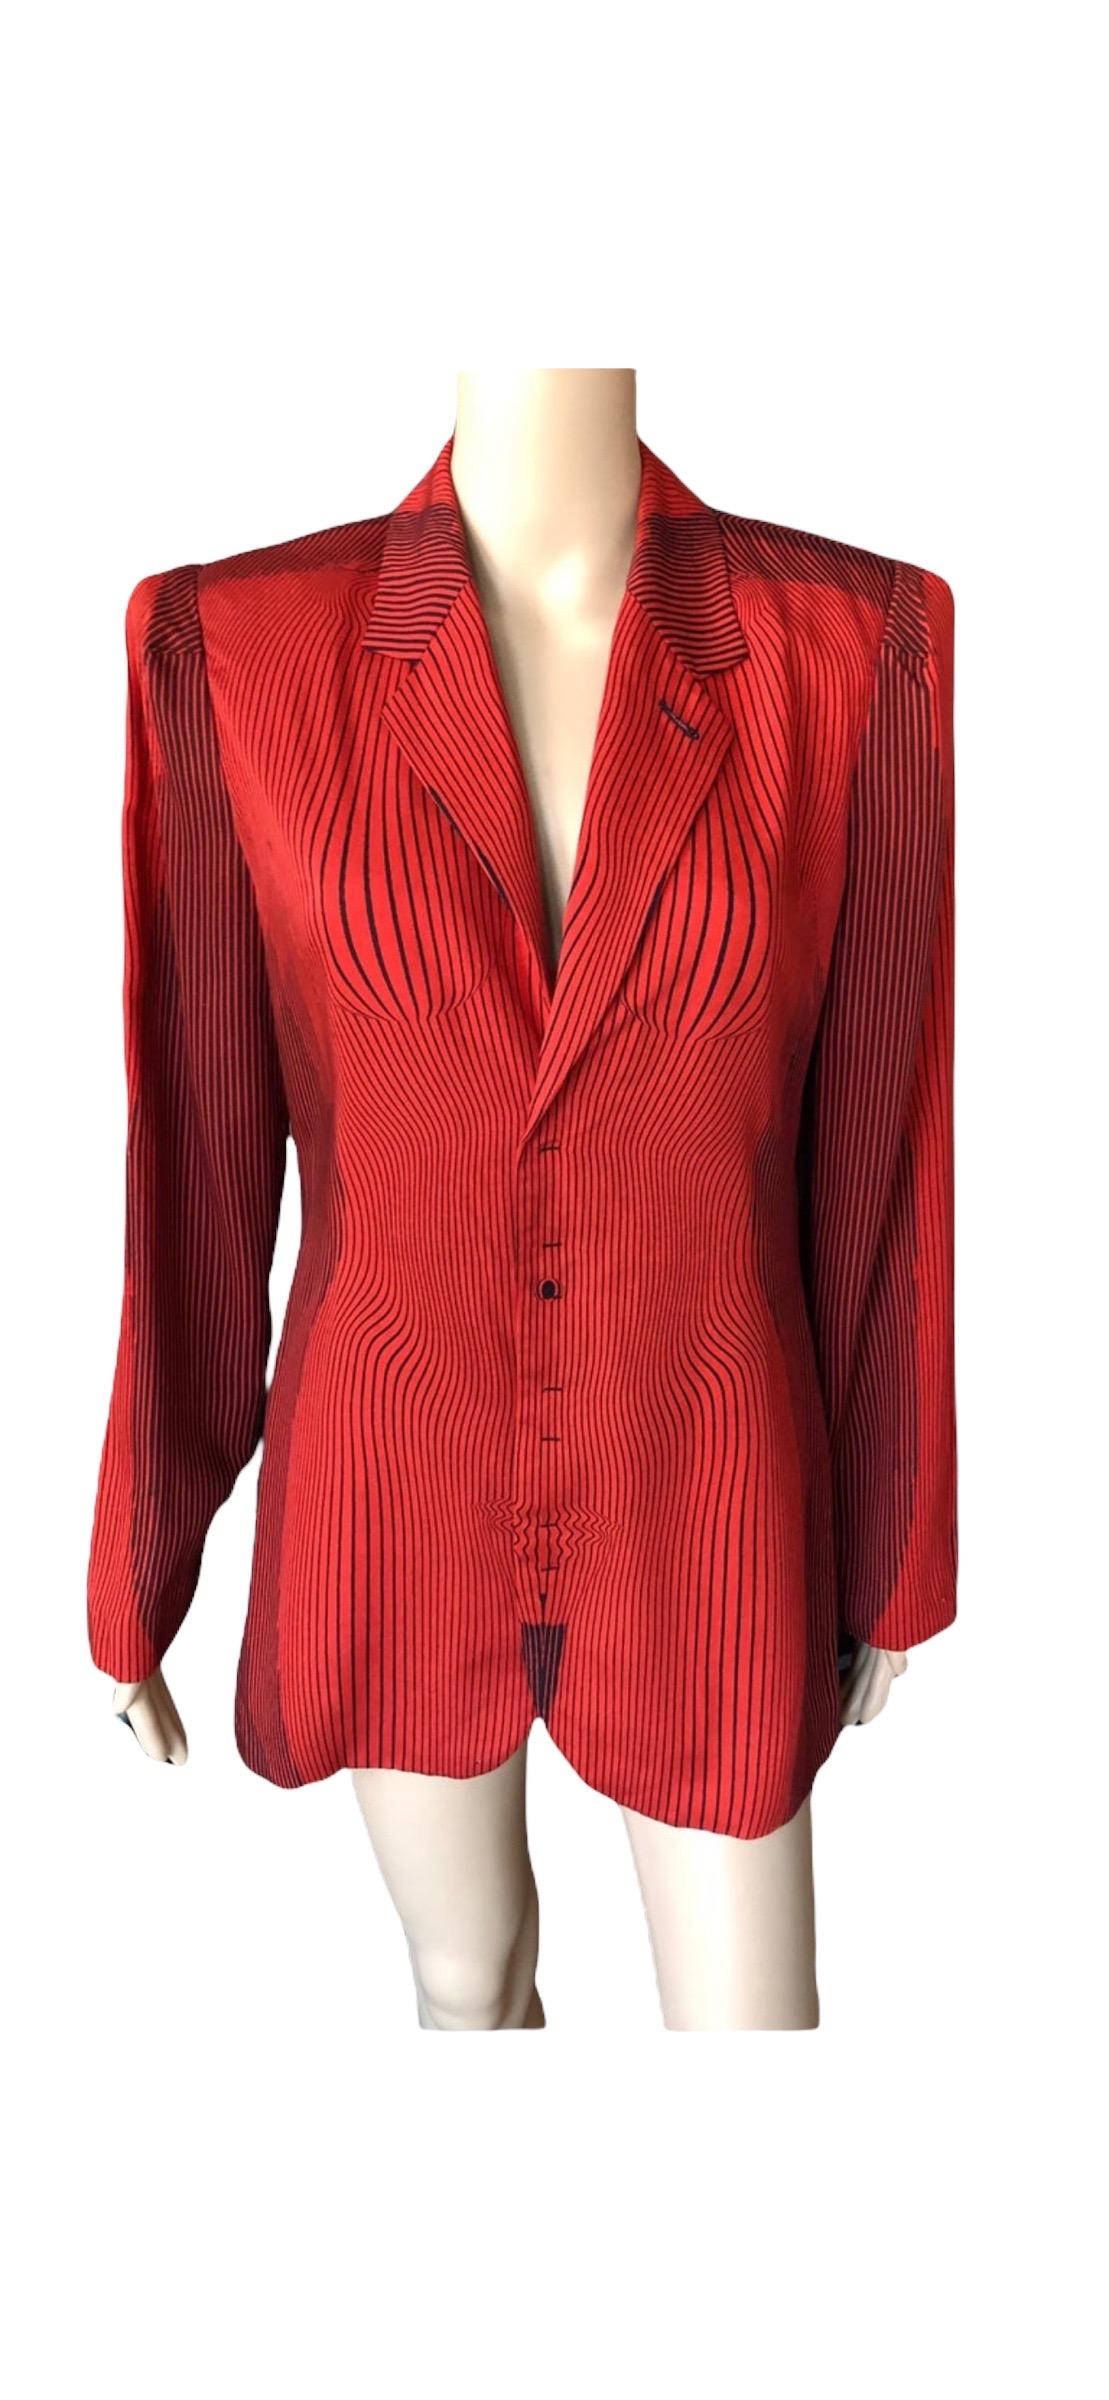 Jean Paul Gaultier S/S 1996 Vintage Cyberbaba Optical Illusion Jacket Blazer Top For Sale 6